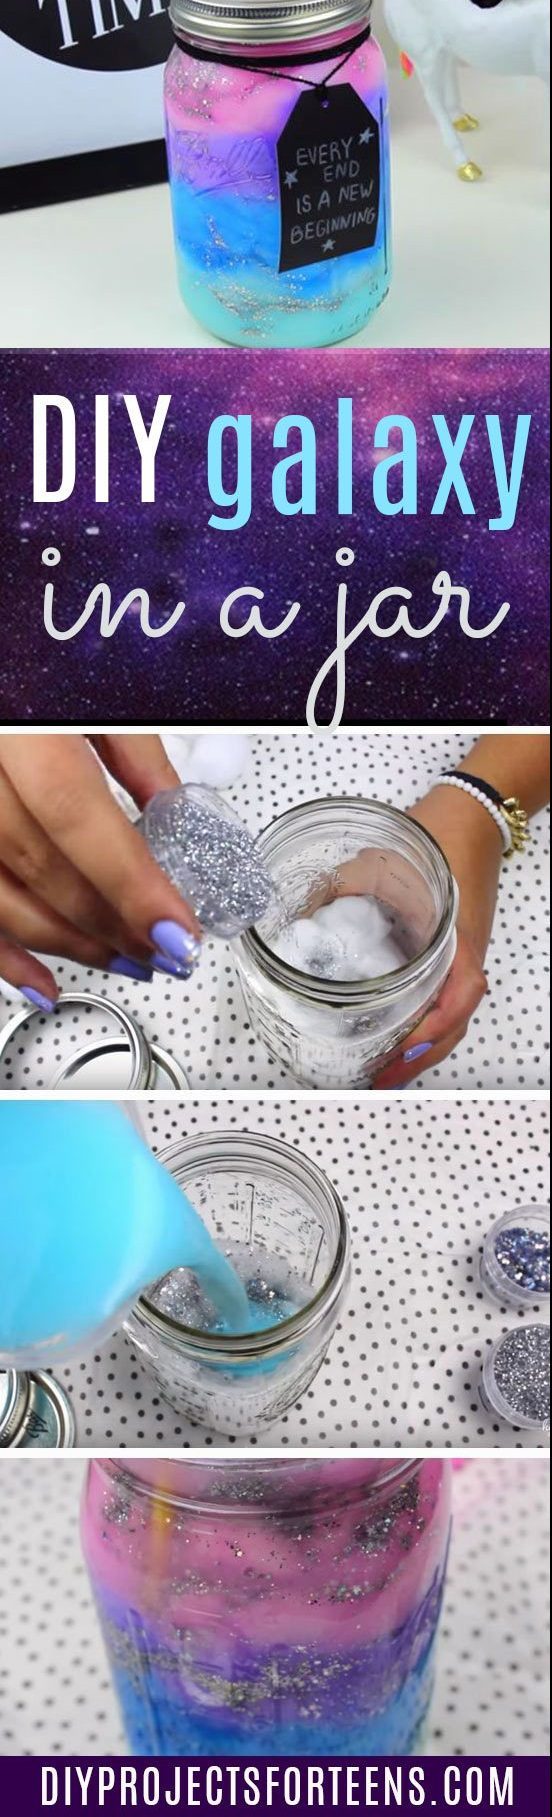 DIY Galaxy in A Jar - Bottled Nebula in A Jar - Cool Crafts and DIY Projects for Teens - Fun Gifts and Decor for Teenager, Tween and Teen Bedrooms - DIY Galaxy Jar - Cheap and Easy Crafts for Teens and Kids